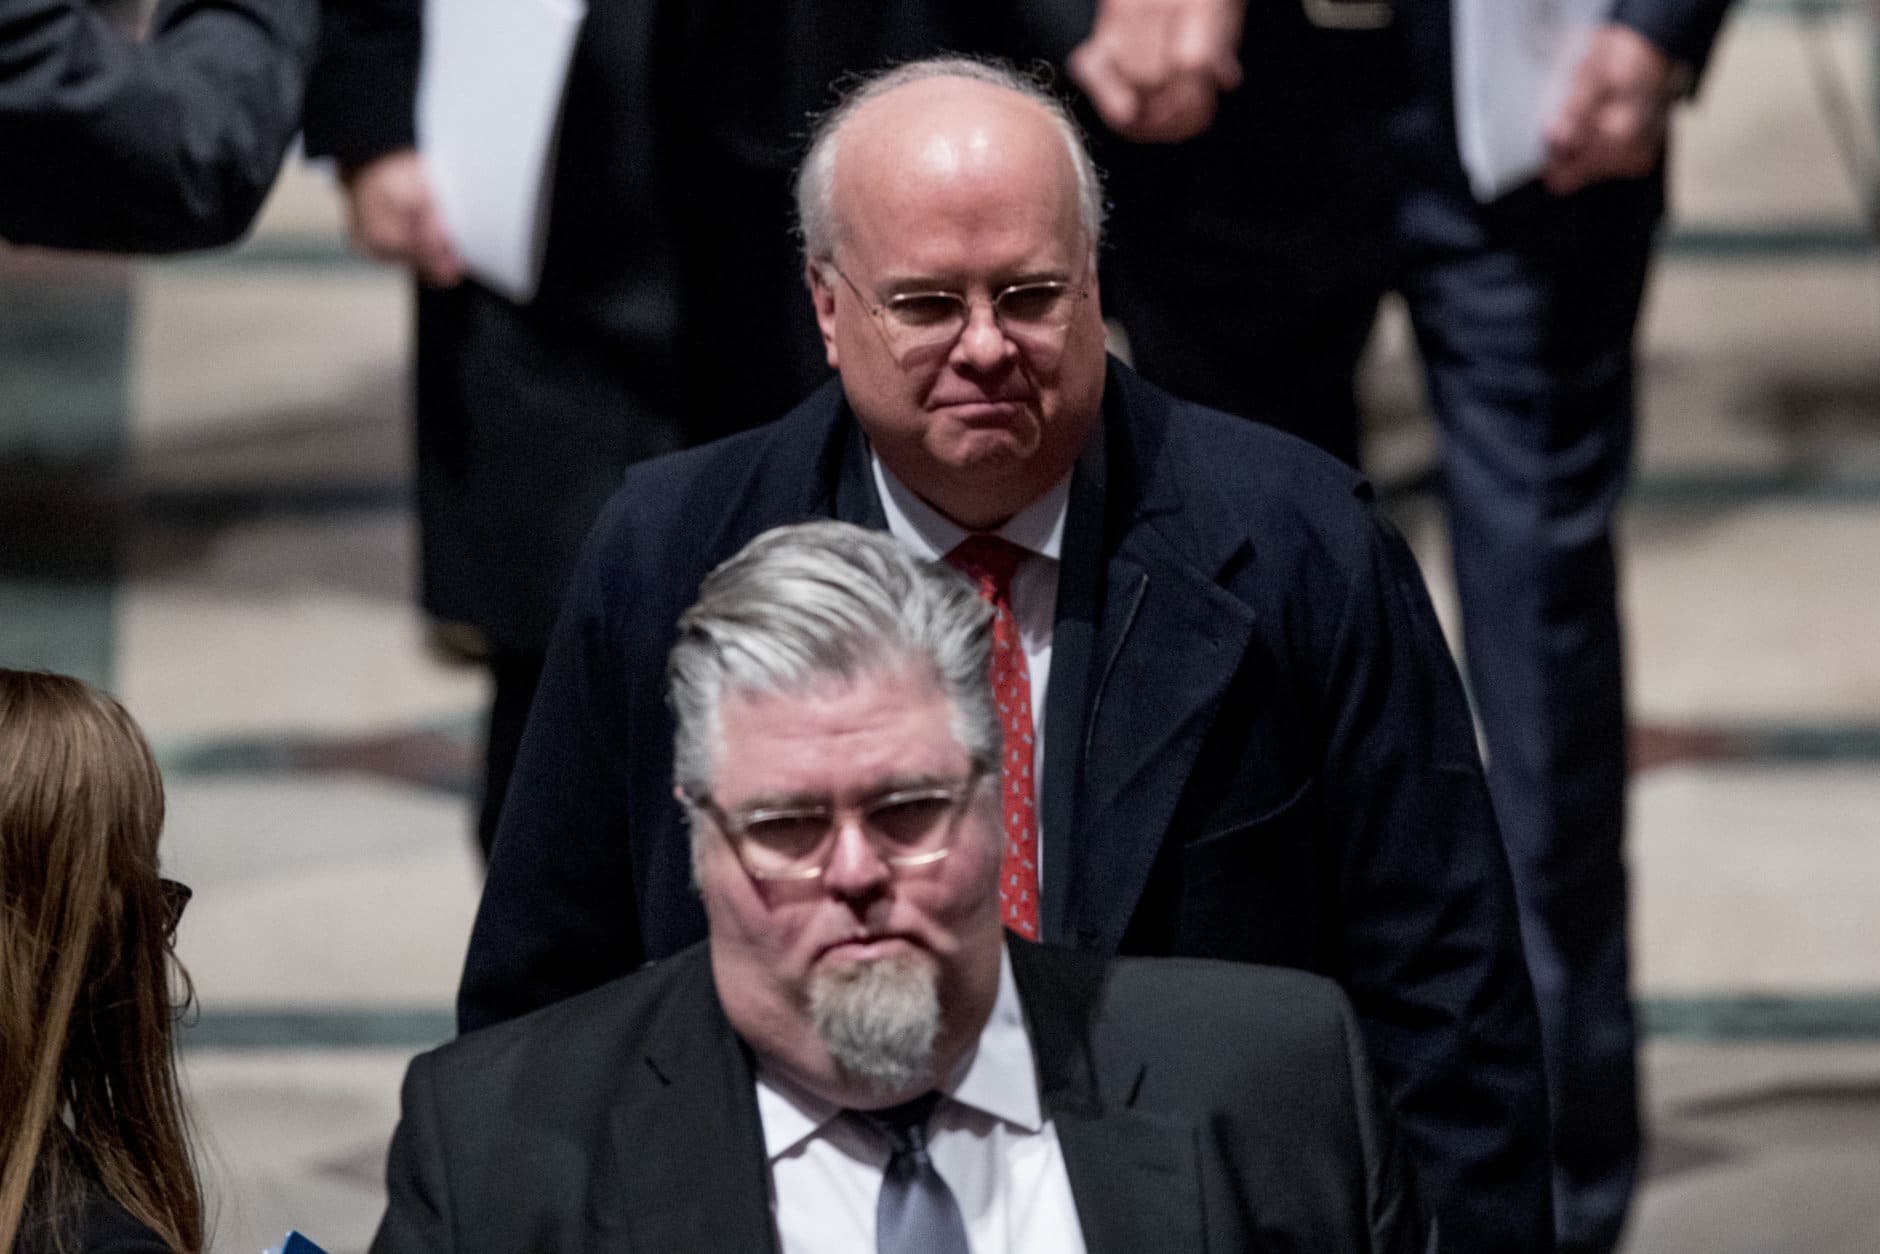 Republican strategist and former White House senior adviser Karl Rove, above, departs following the State Funeral for former President George H.W. Bush at the National Cathedral, December 5, 2018 in Washington, DC. (Photo by Andrew Harnik-Pool/Getty Images)